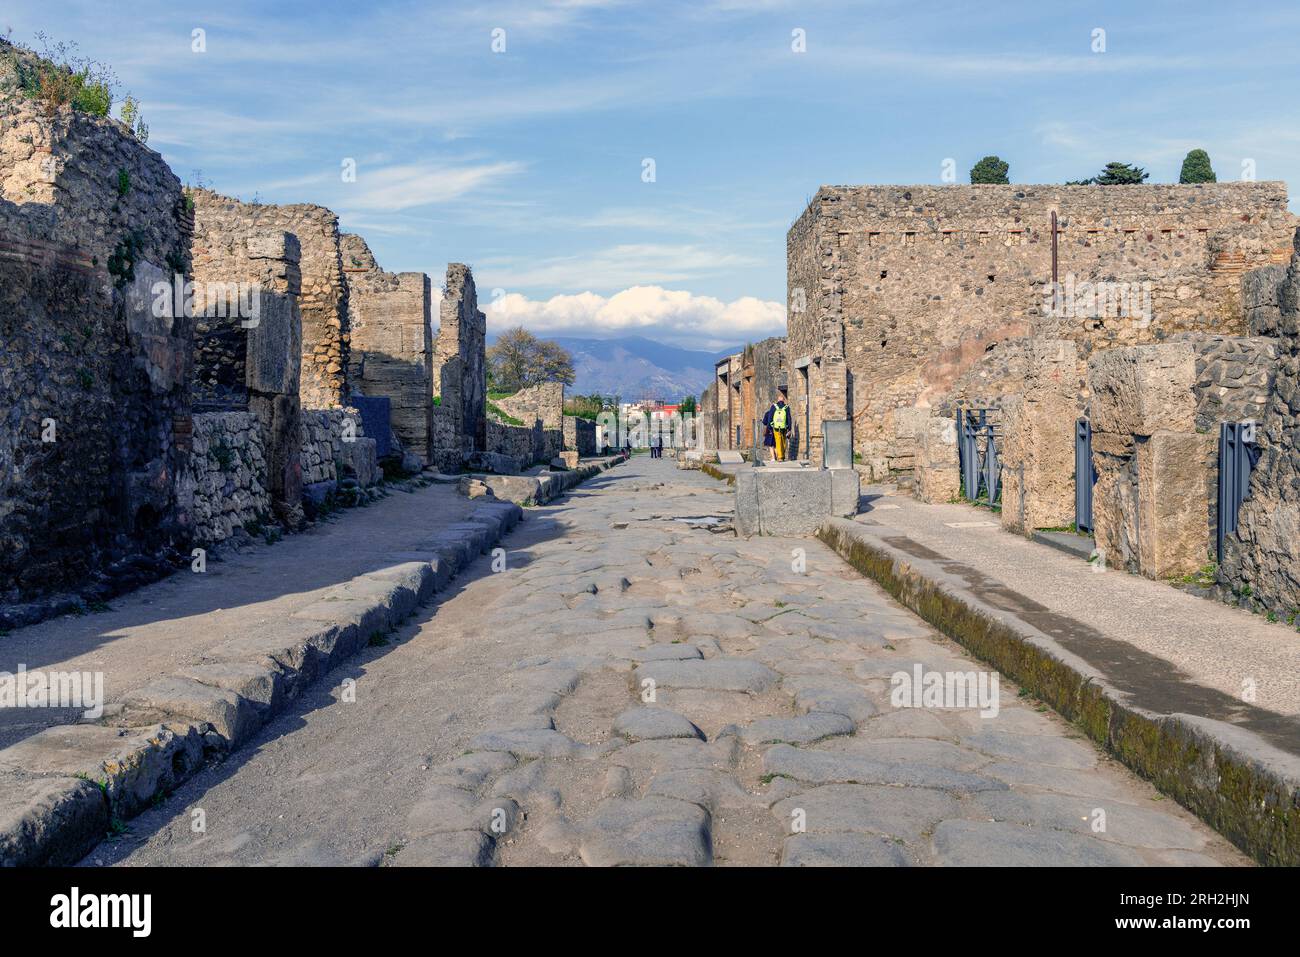 Pompeii Archaeological Site, Campania, Italy.  Via dell'abbondanza, one of the major streets in the city.  Pompeii, Herculaneum, and Torre Annunziata Stock Photo